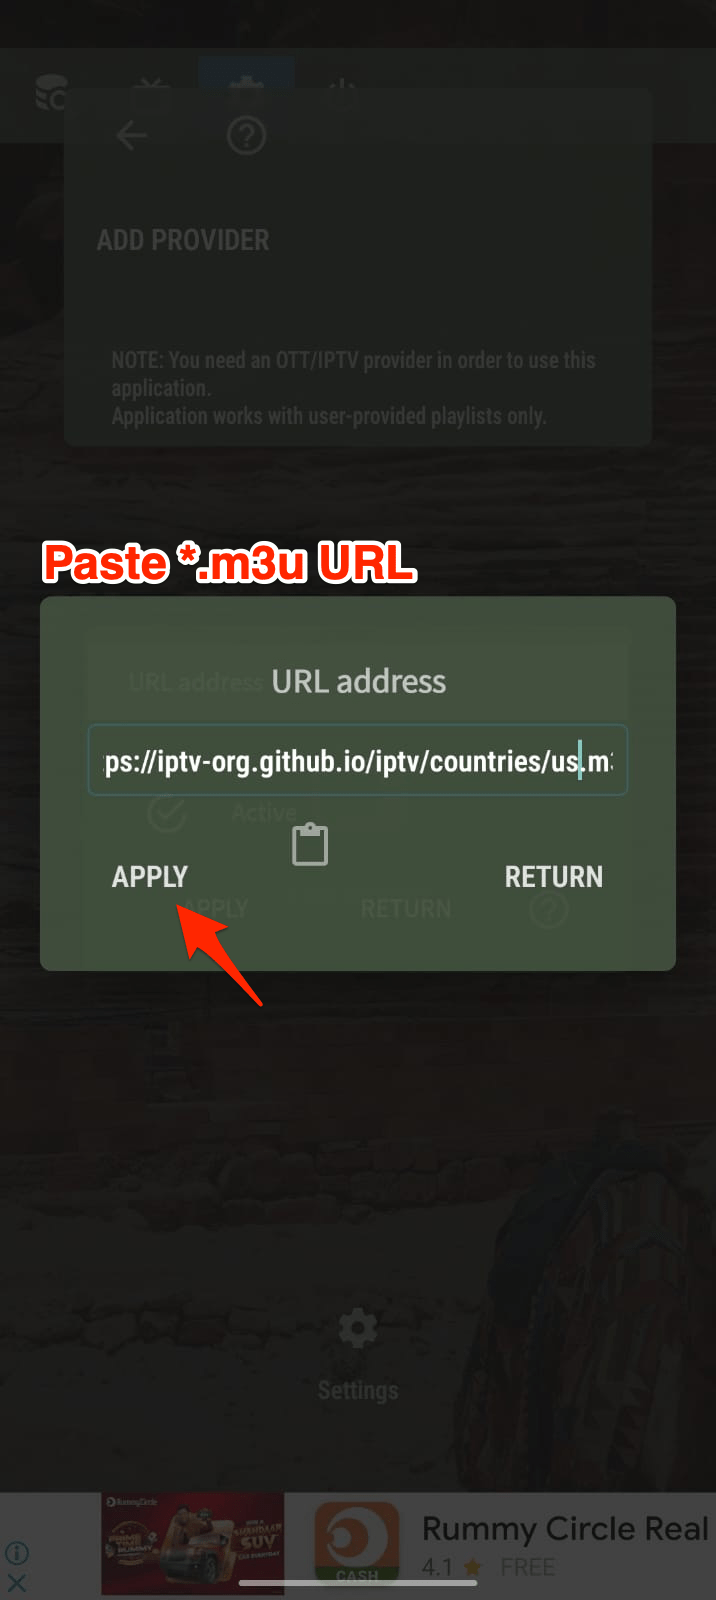 Copy the IPTV URL and paste it into the URL box on the app and Apply